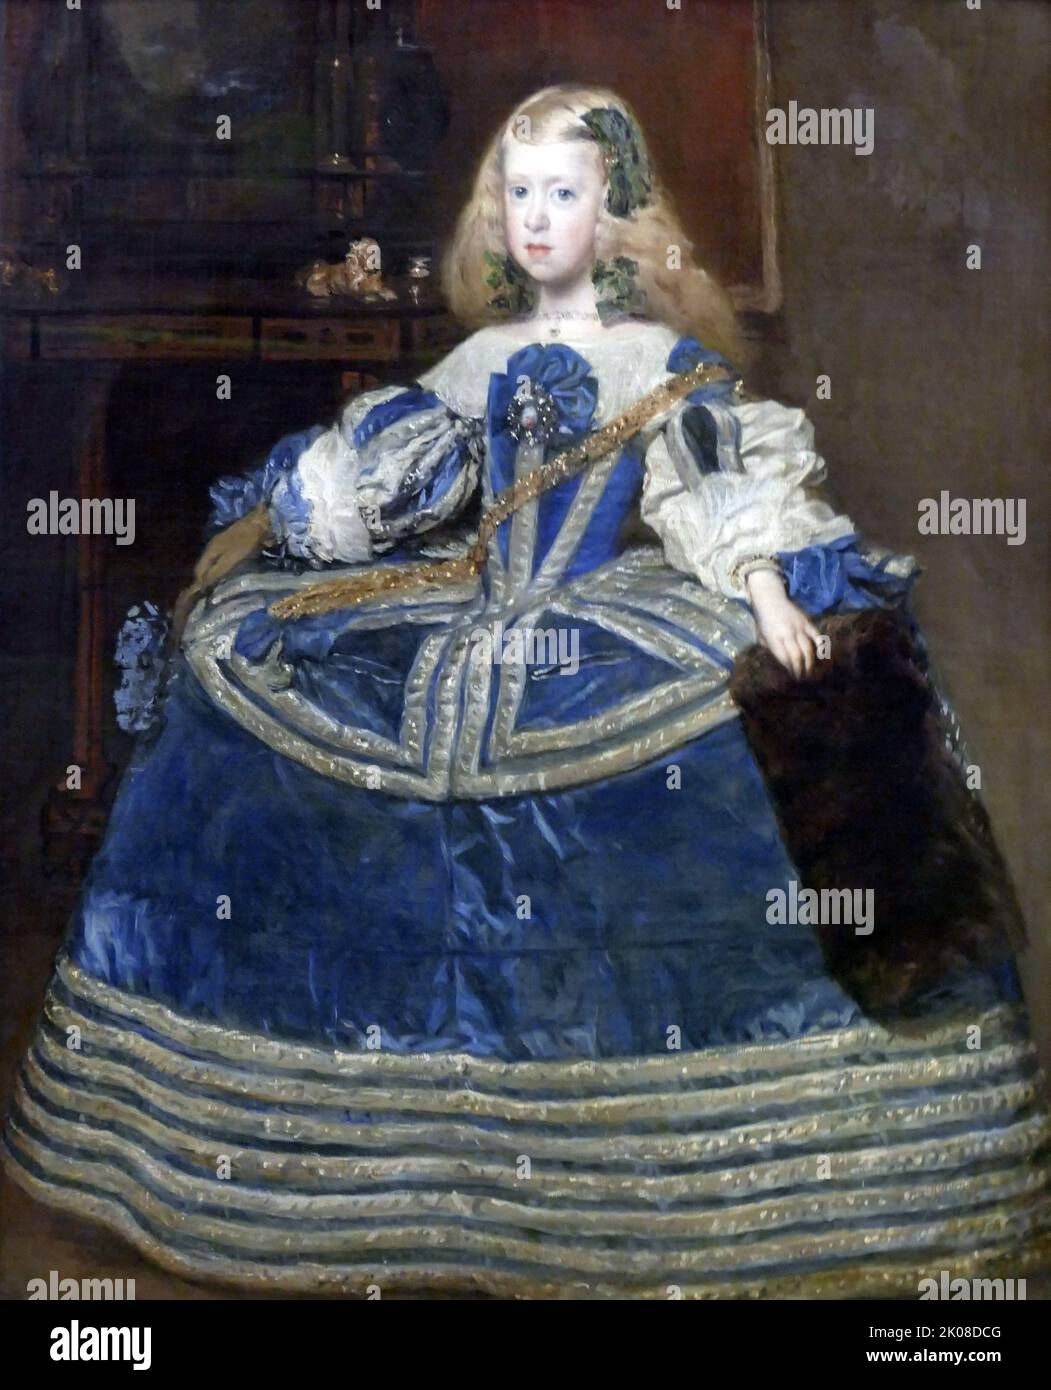 Infantin Margarita Teresa in blauem Kleid, 1659 by Diego Rodriguez de Silva y Velazquez (baptized June 6, 1599 - August 6, 1660) was a Spanish painter, the leading artist in the court of King Philip IV of Spain and Portugal, and of the Spanish Golden Age Stock Photo